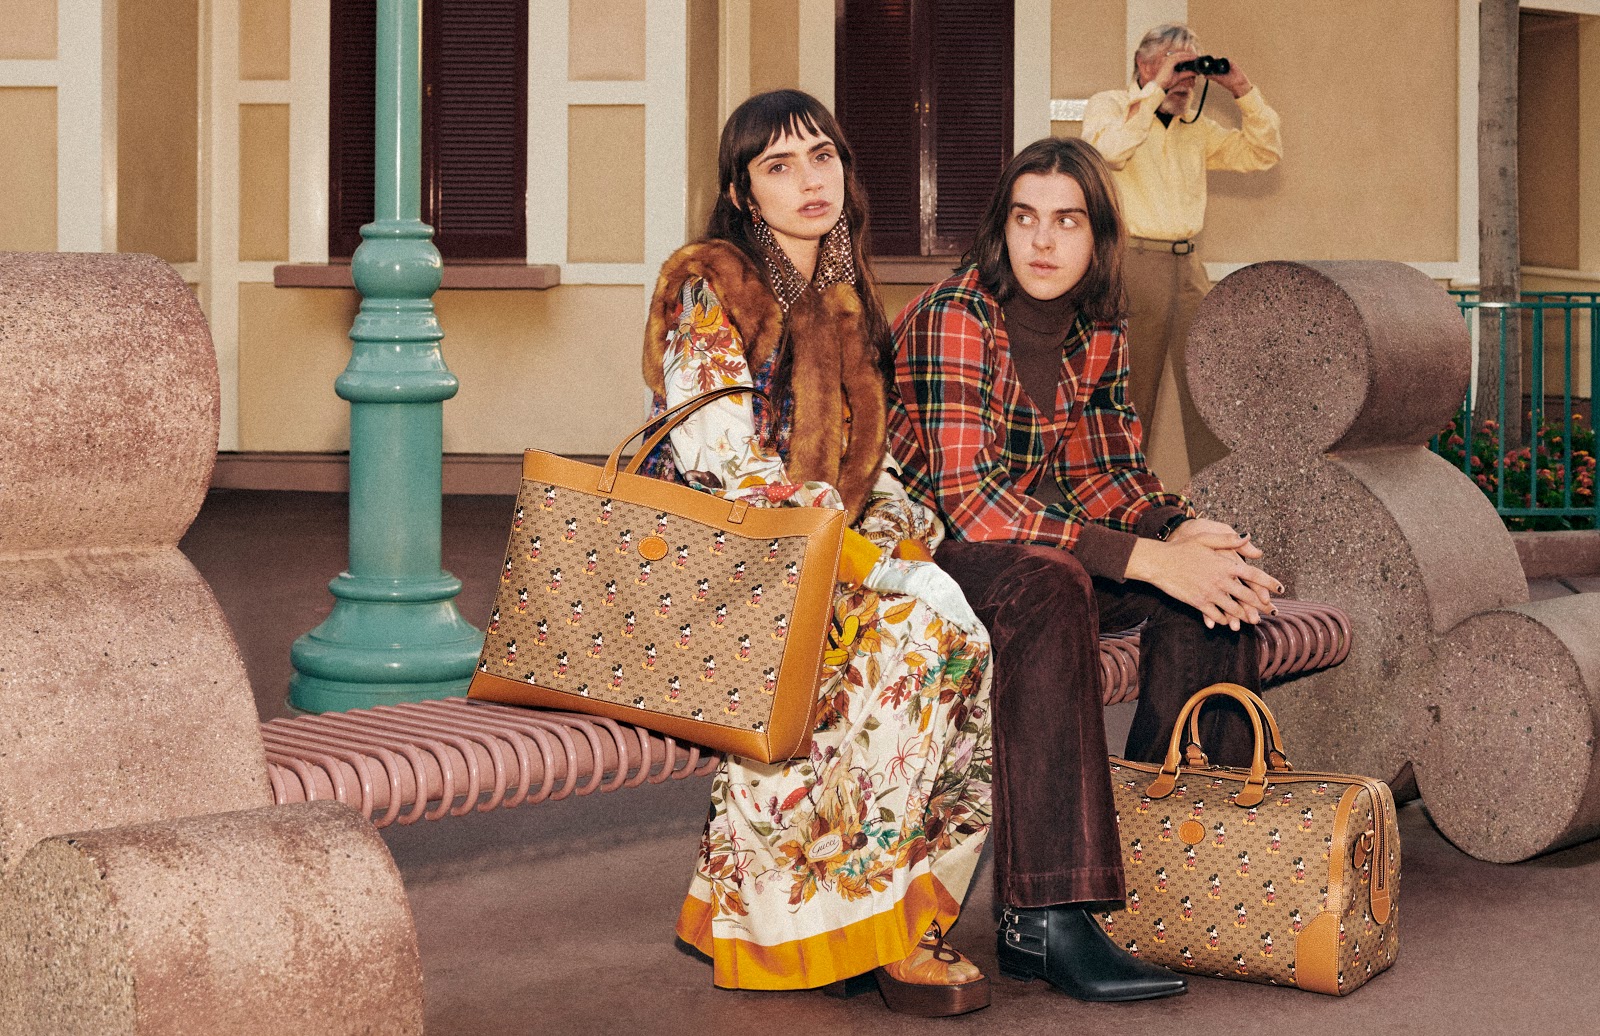 5 Of The Best Pieces From The Disney X Gucci Collection